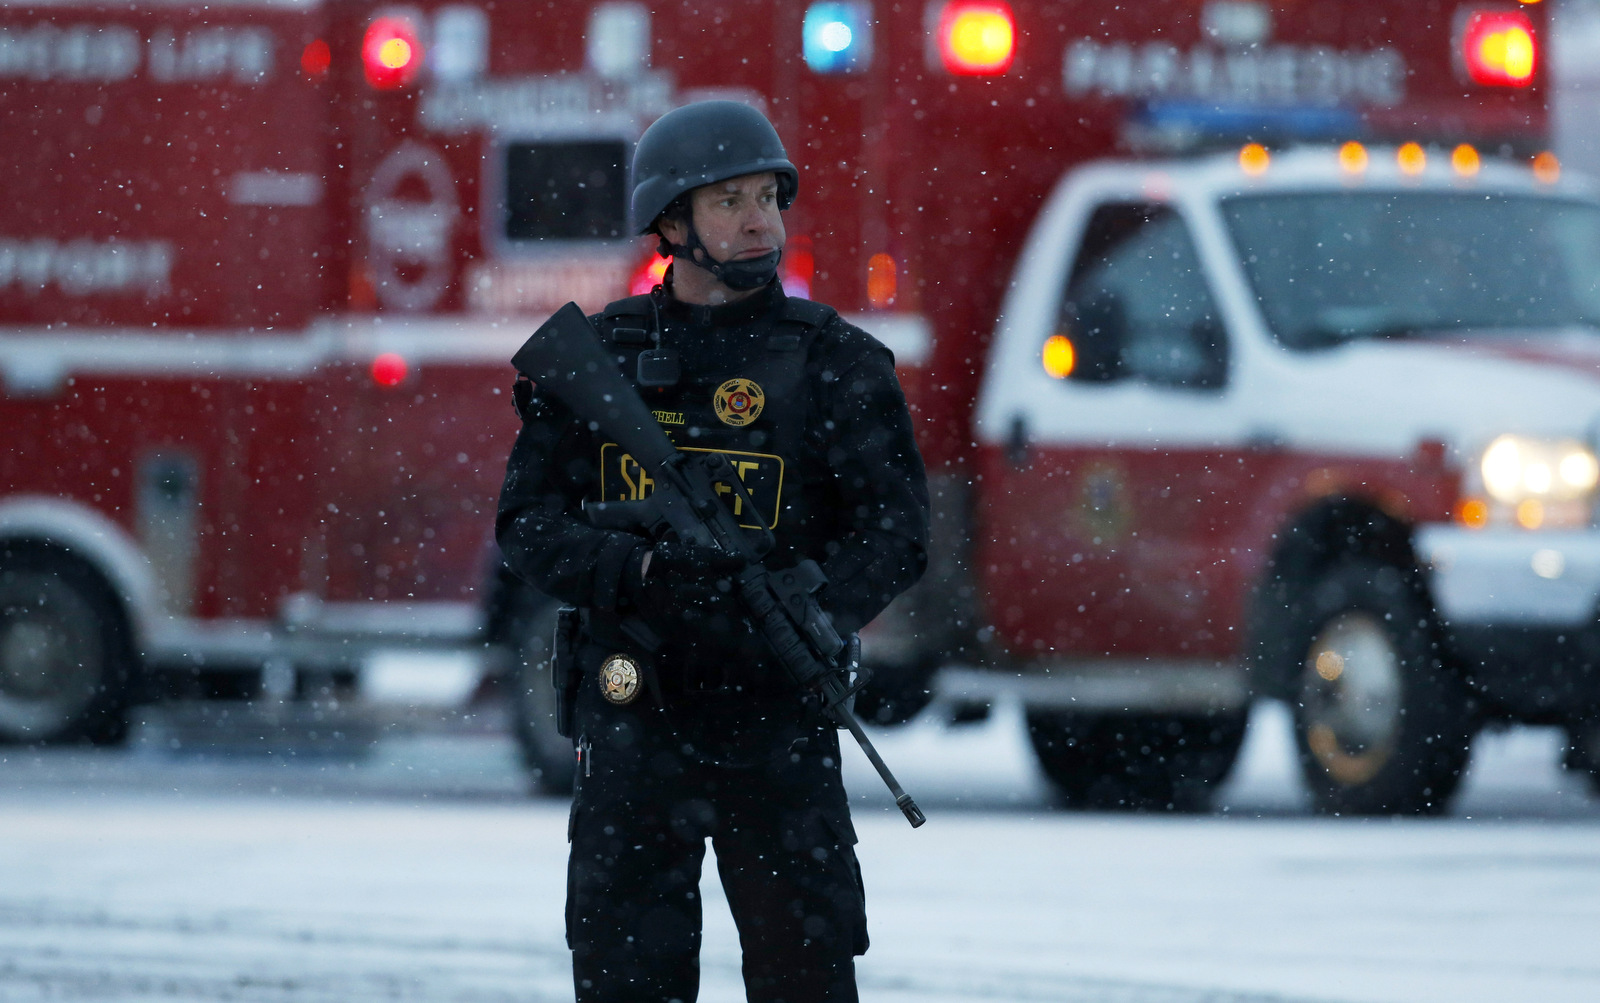 An officer stands guard near a Planned Parenthood clinic Friday, Nov. 27, 2015, in Colorado Springs, Colo. A gunman opened fire at the clinic on Friday, authorities said, wounding multiple people. (AP Photo/David Zalubowski)